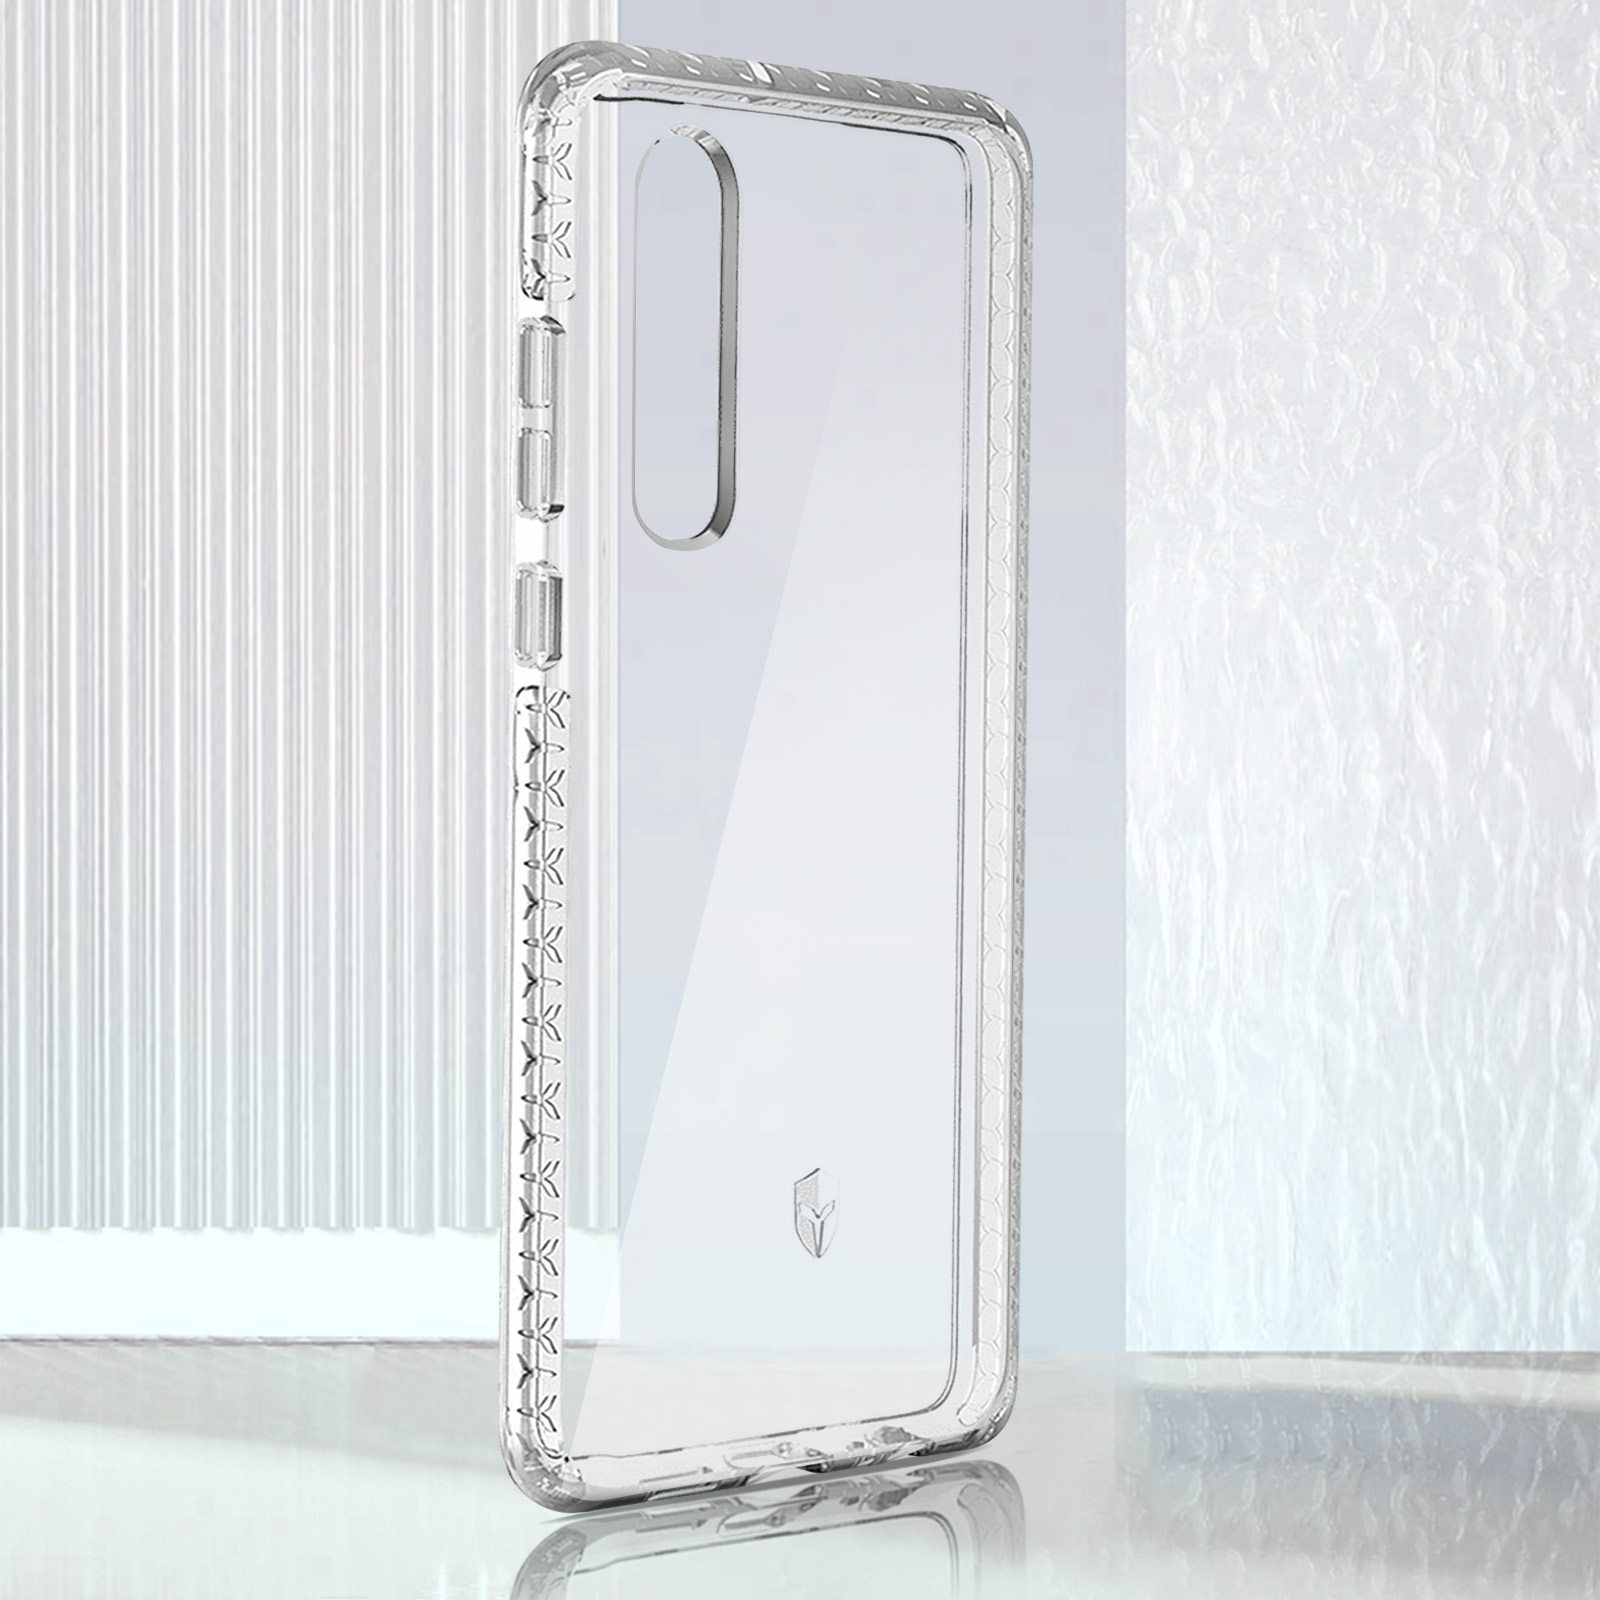 Series, Huawei, Huawei Life Transparent CASE Backcover, mit P30, Tryax-System FORCE